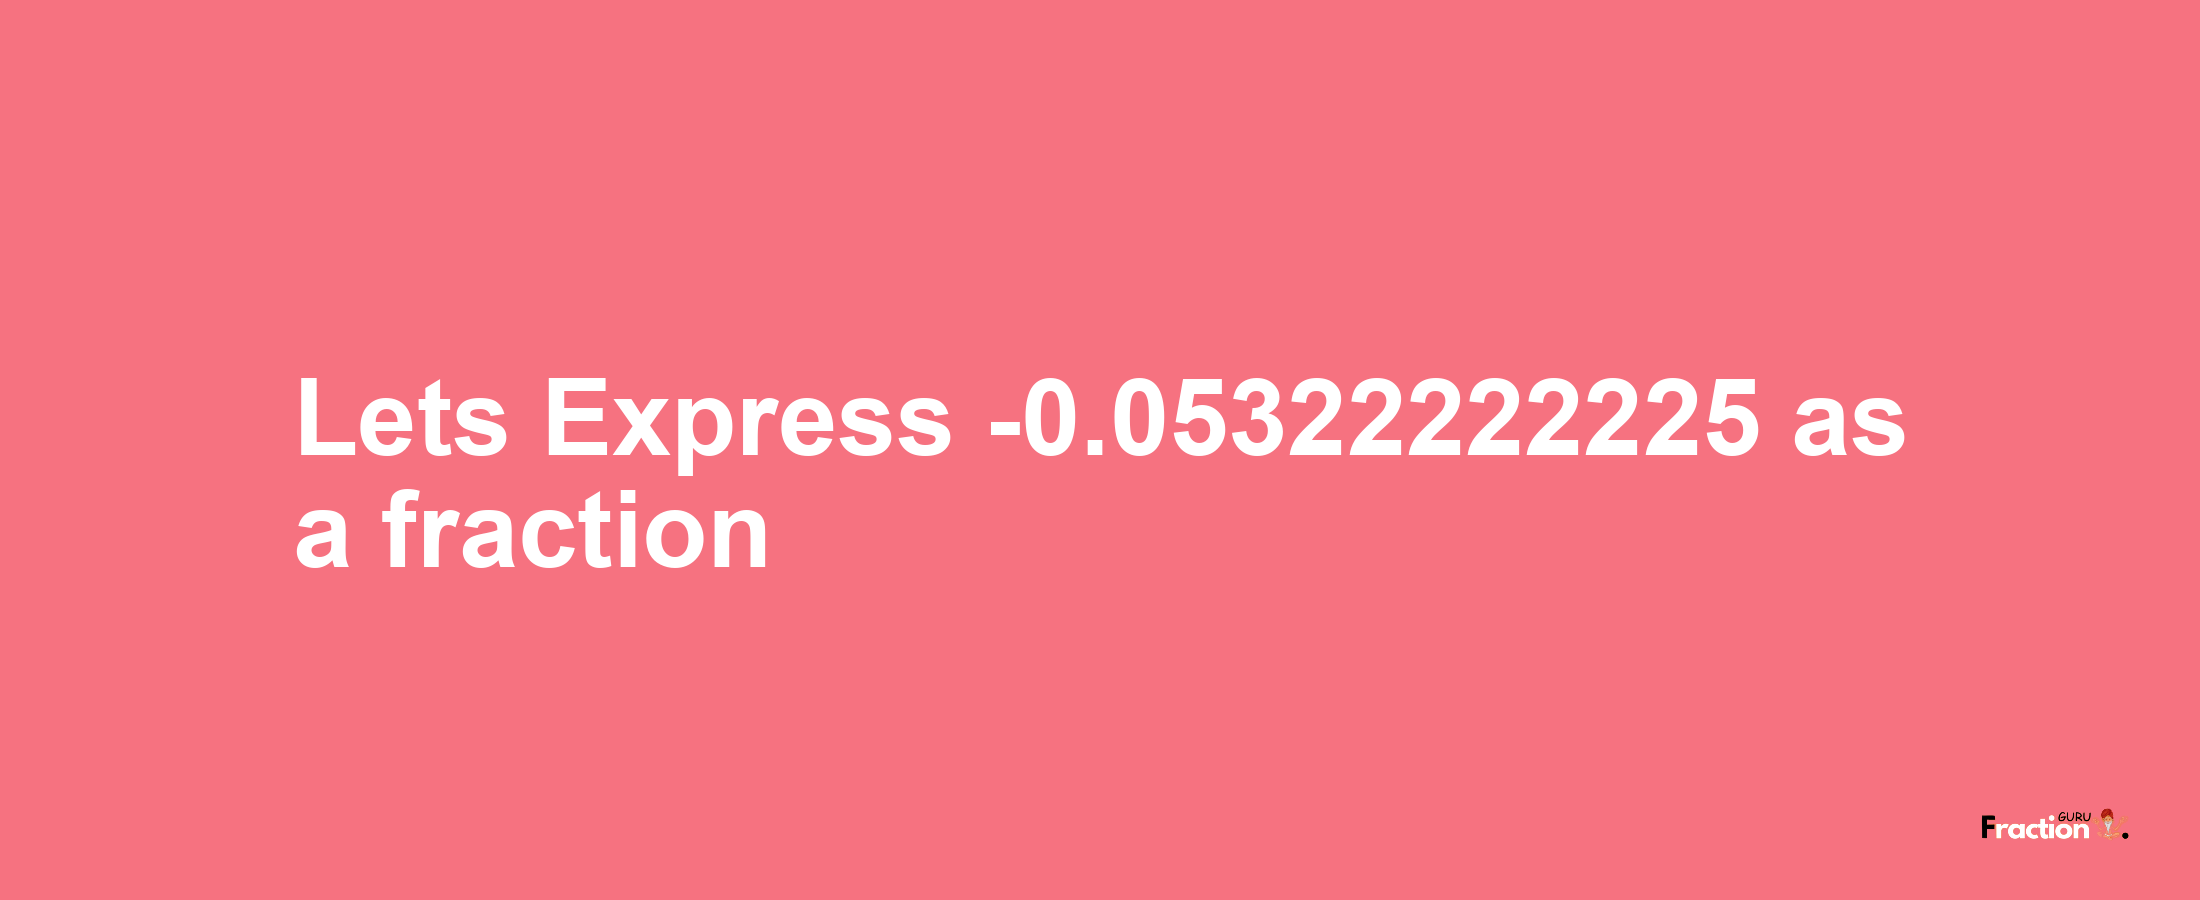 Lets Express -0.05322222225 as afraction